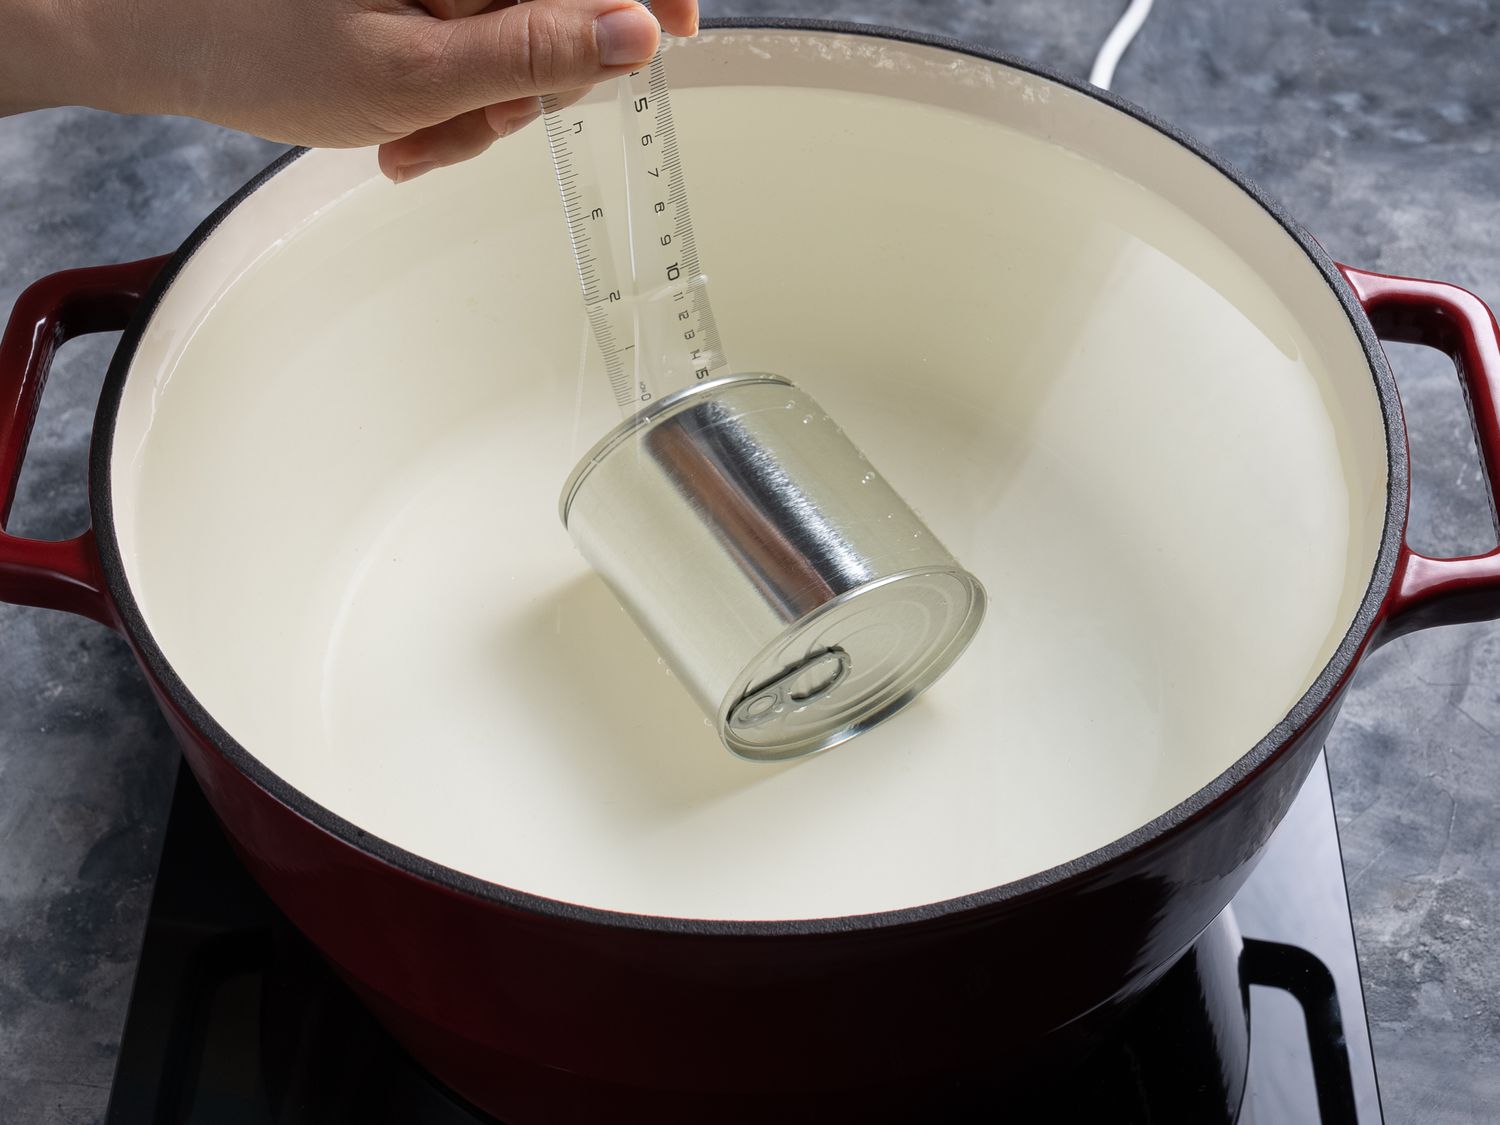 The can of condensed milk in a dutch oven filled with water, with a clear ruler placed in the pot to indicate how much water is covering the can